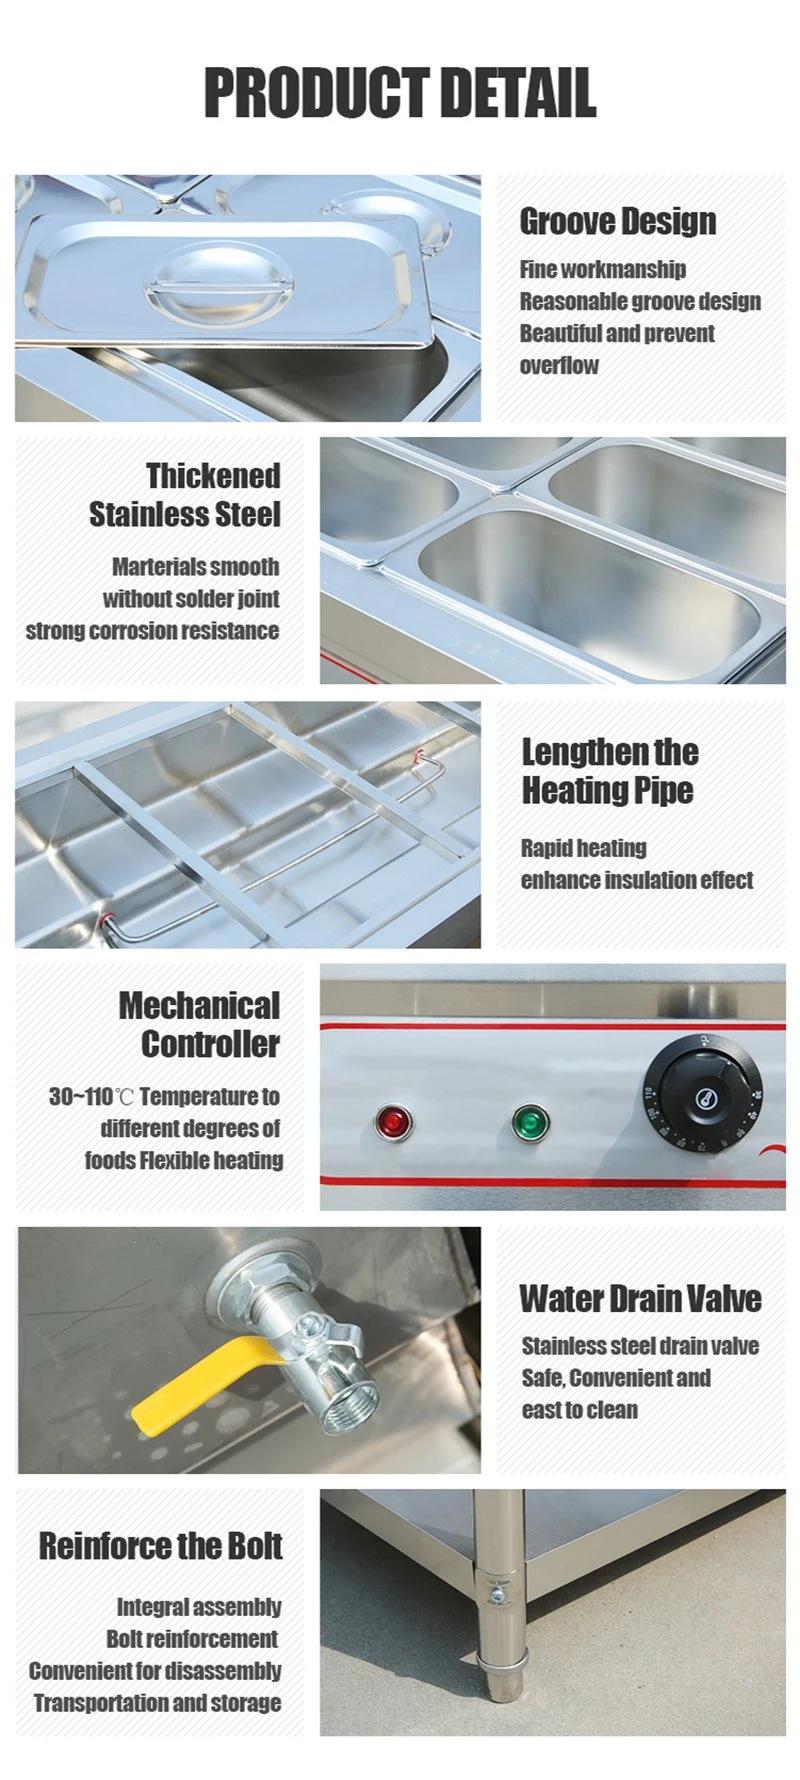 Catering Equipment Counter Top Curved Bain Marie Glass Hot Food Display Food Warmer